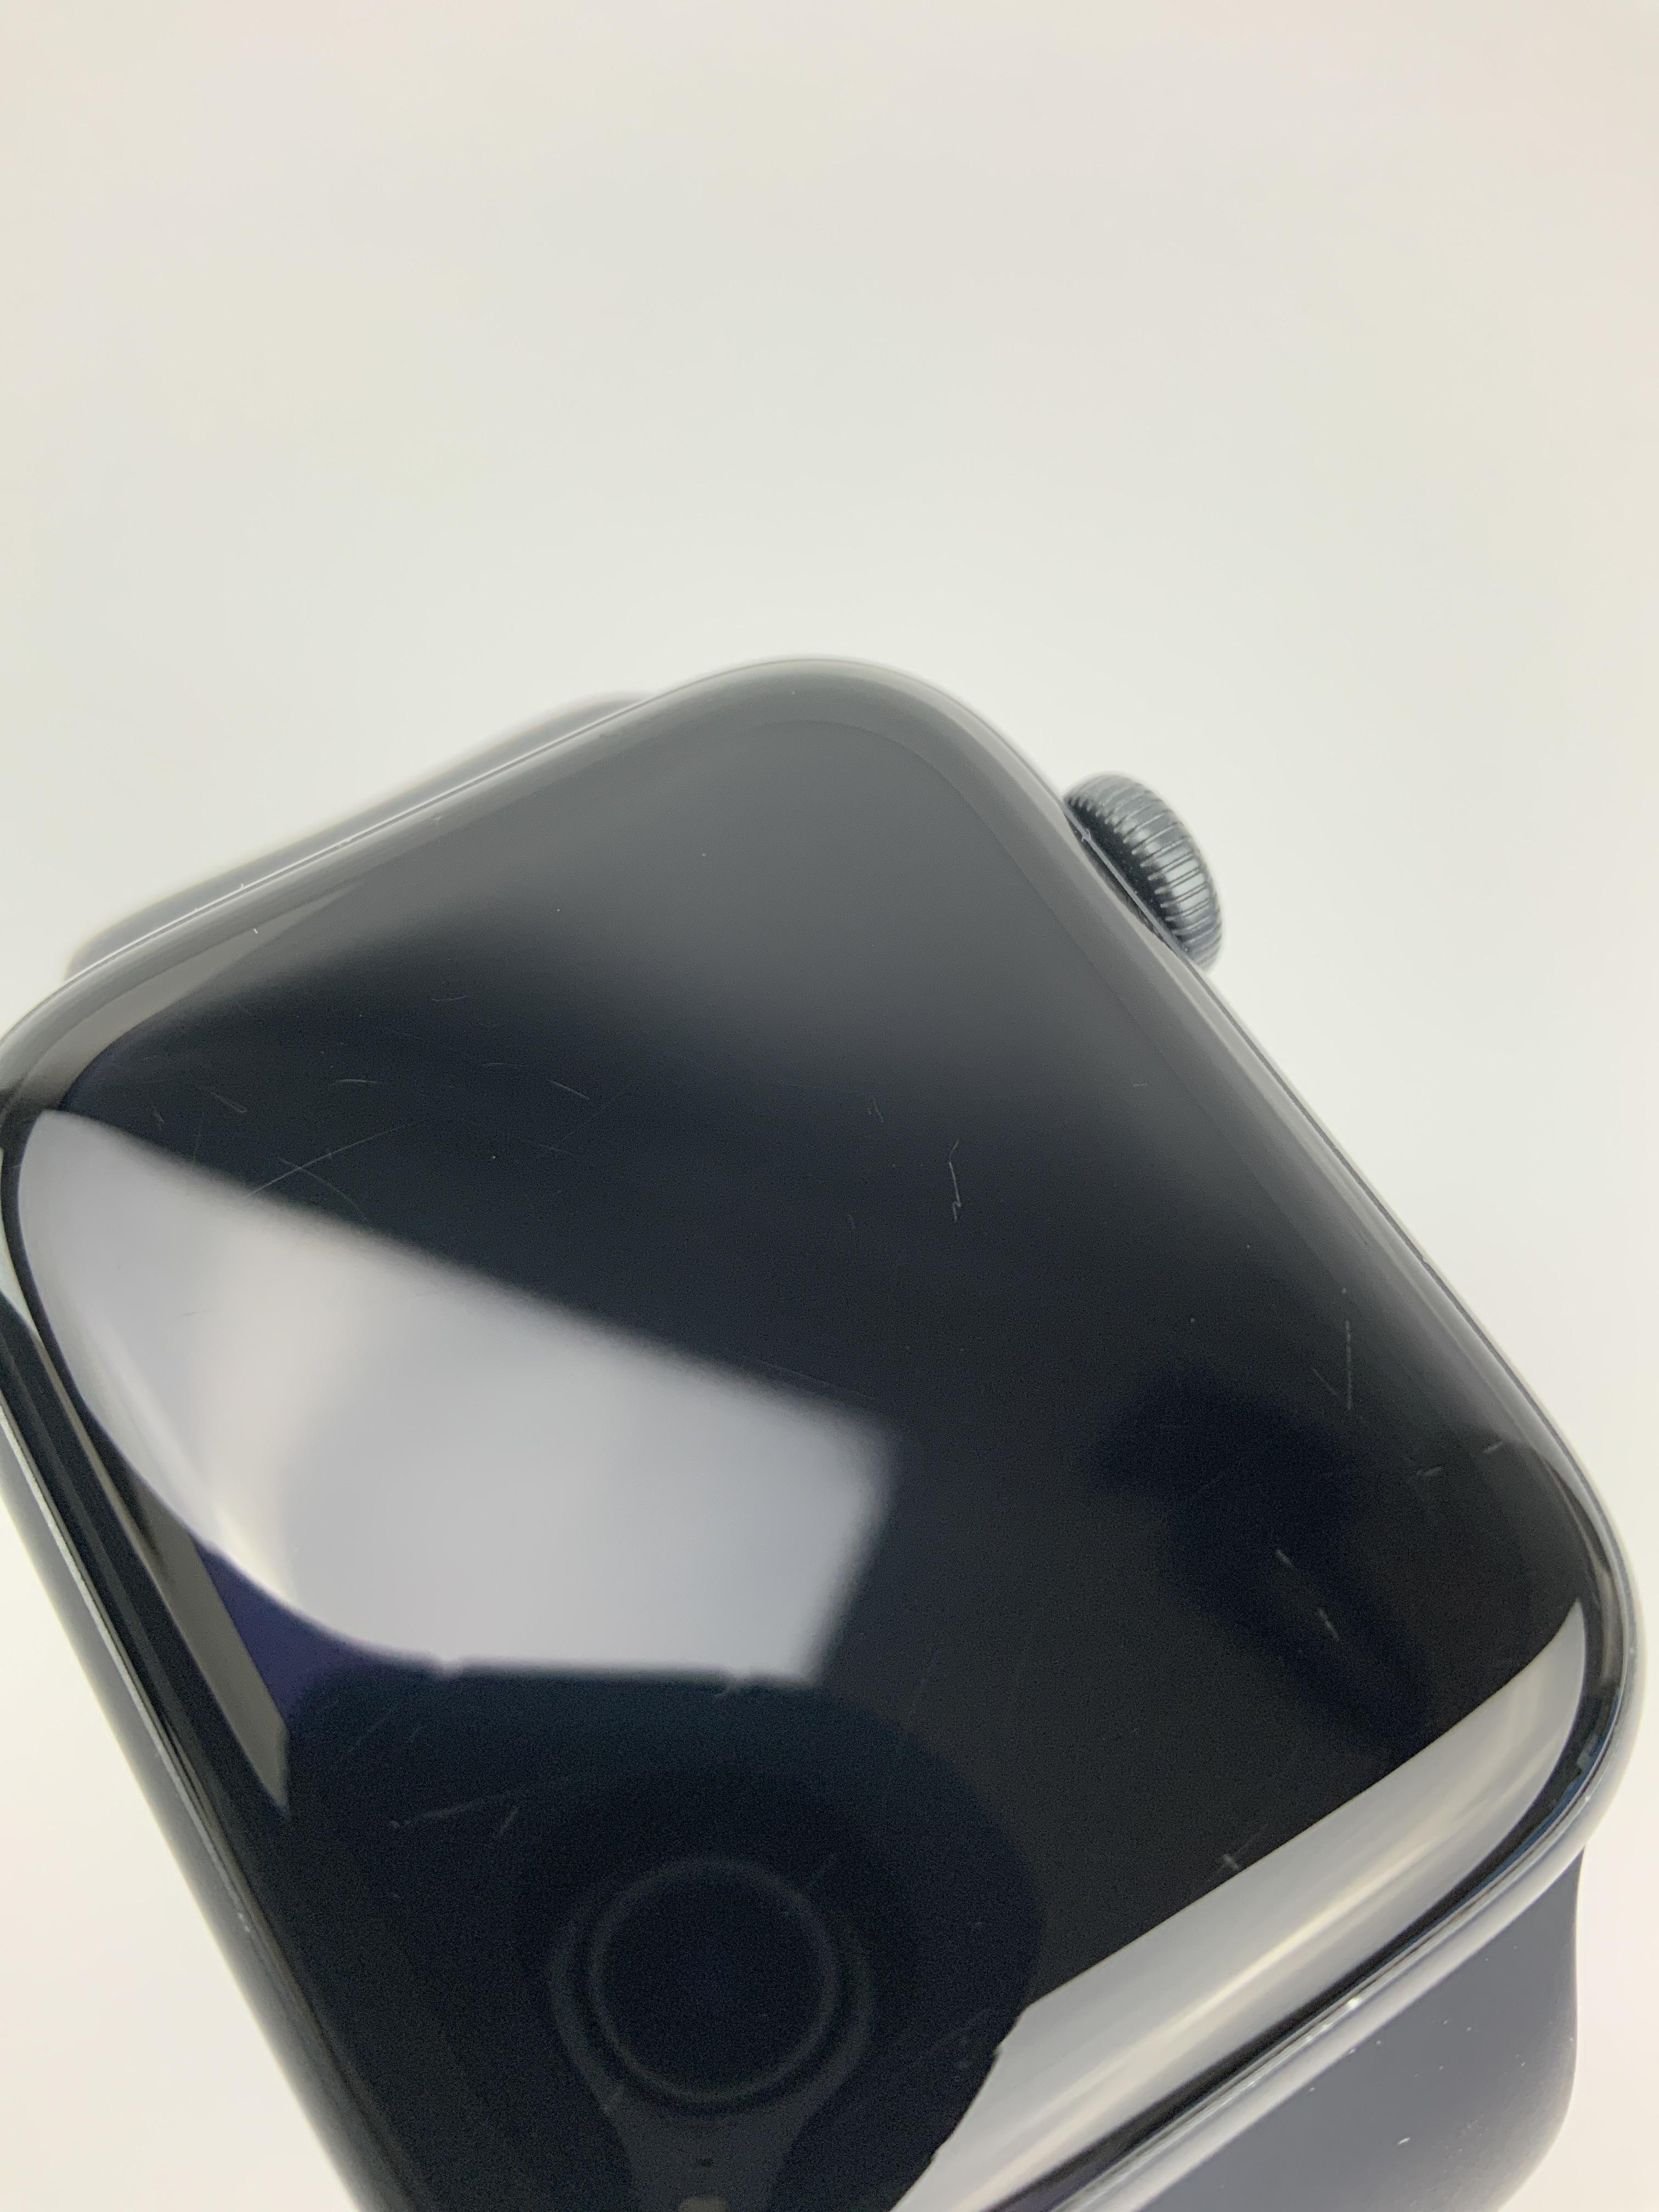 Watch Series 5 Aluminum Cellular (44mm), Space Gray, Afbeelding 2